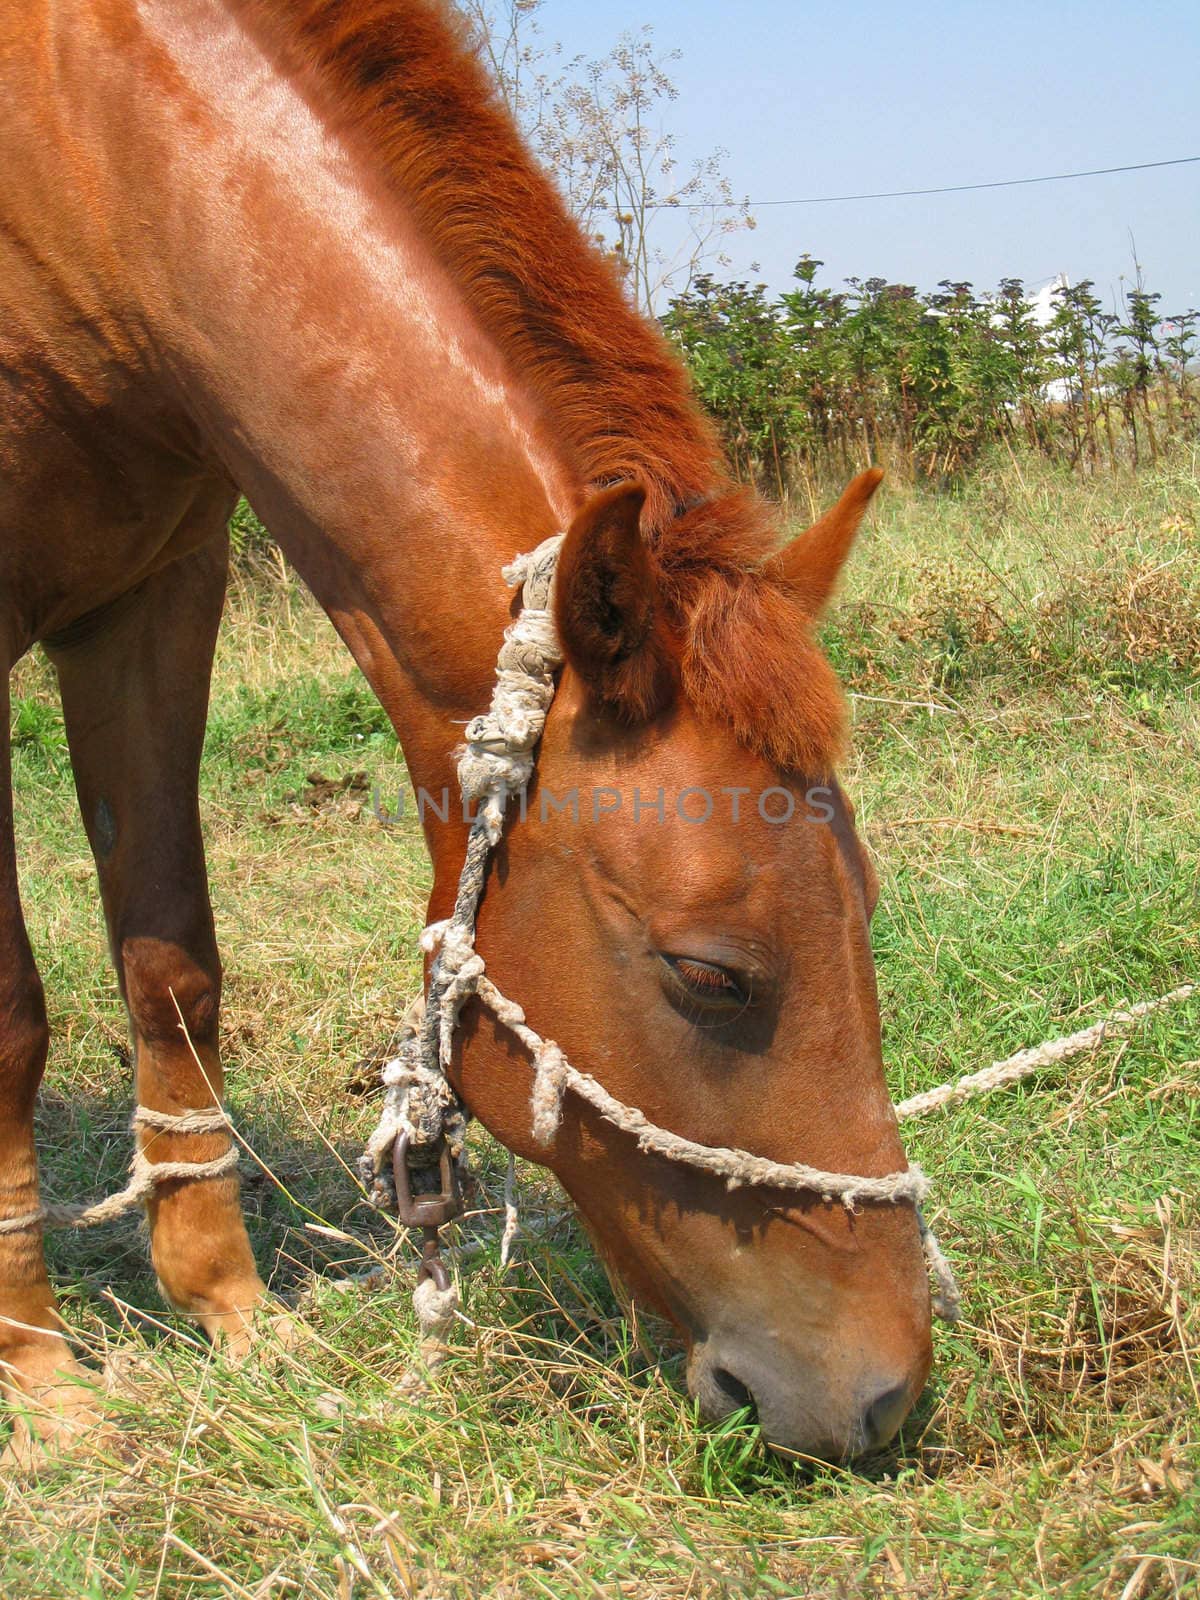 Young brown horse eating grass in a field